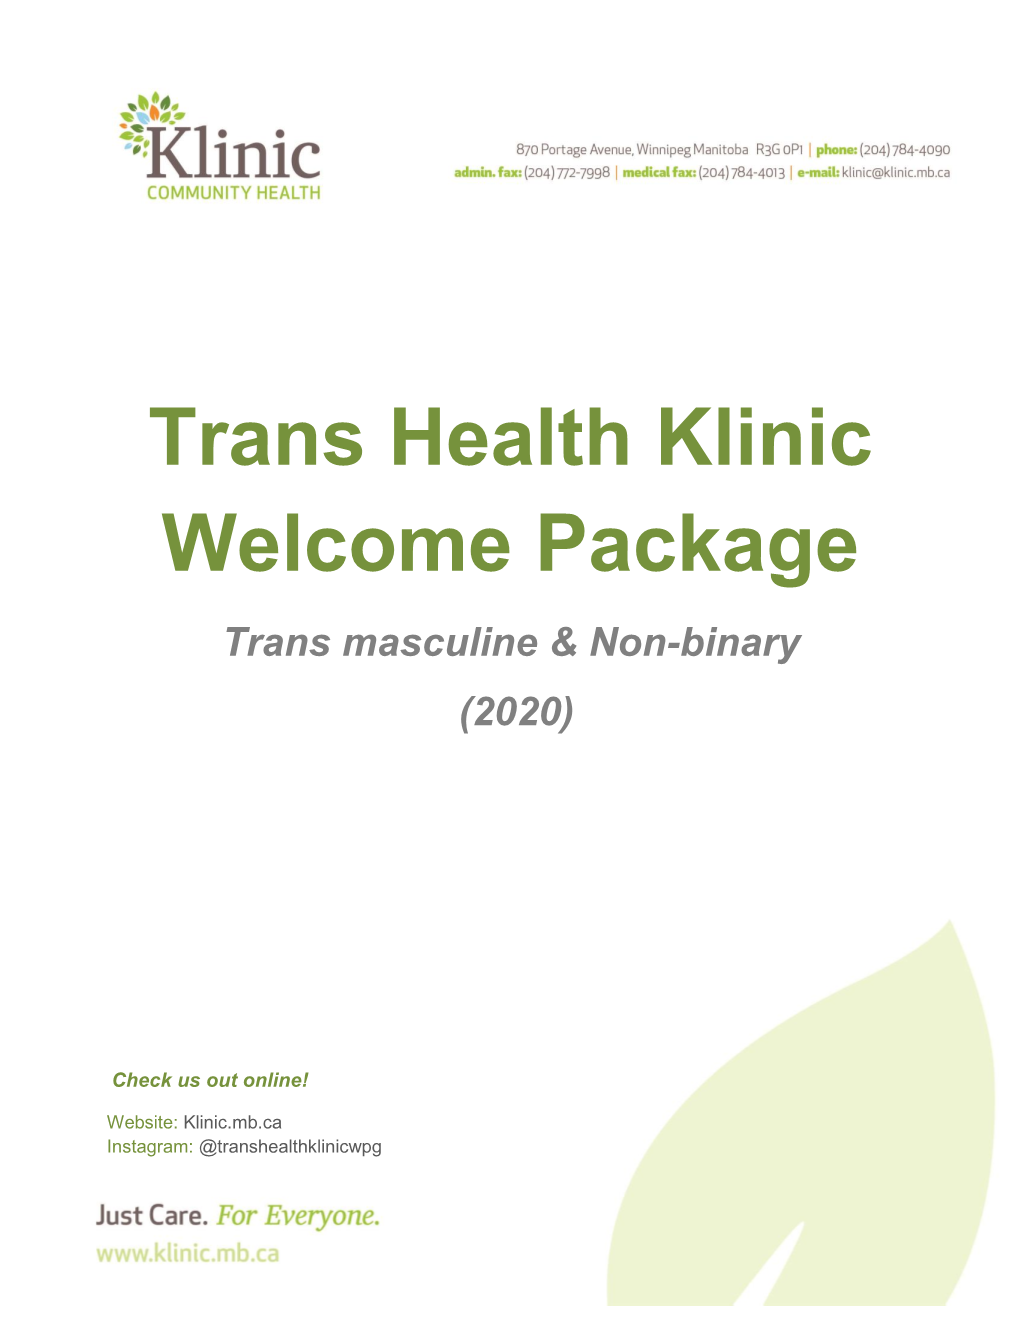 Trans Health Klinic Welcome Package Trans Masculine & Non-Binary (2020)